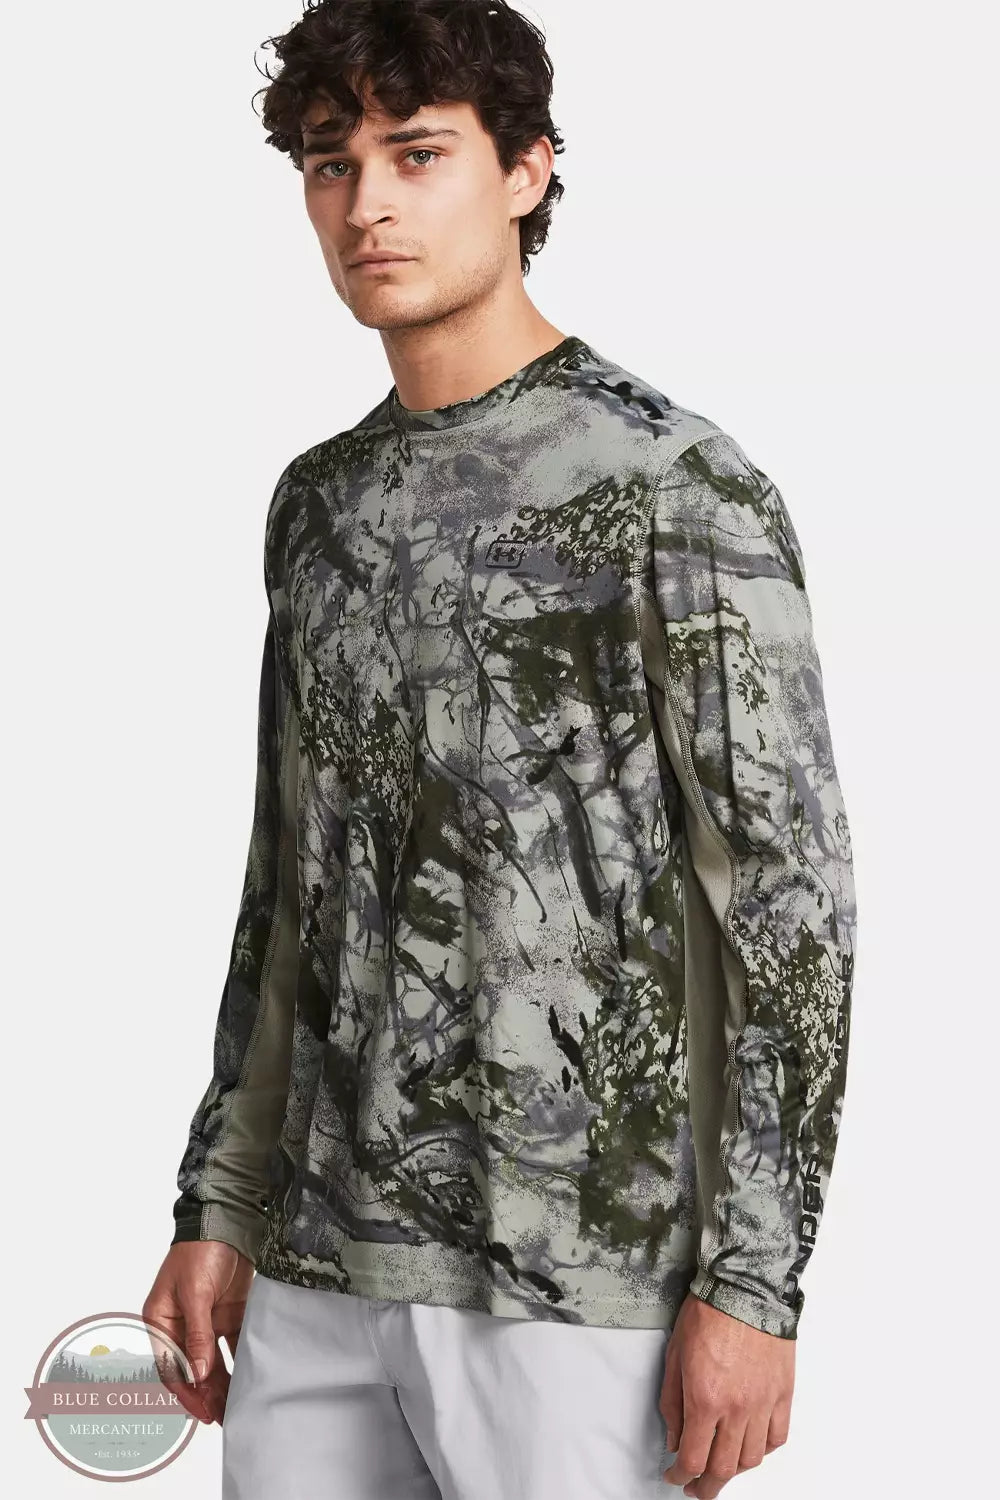 Under Armour 1383573 Fish Pro Chill Camo Long Sleeve Shirt Grove Green Front View